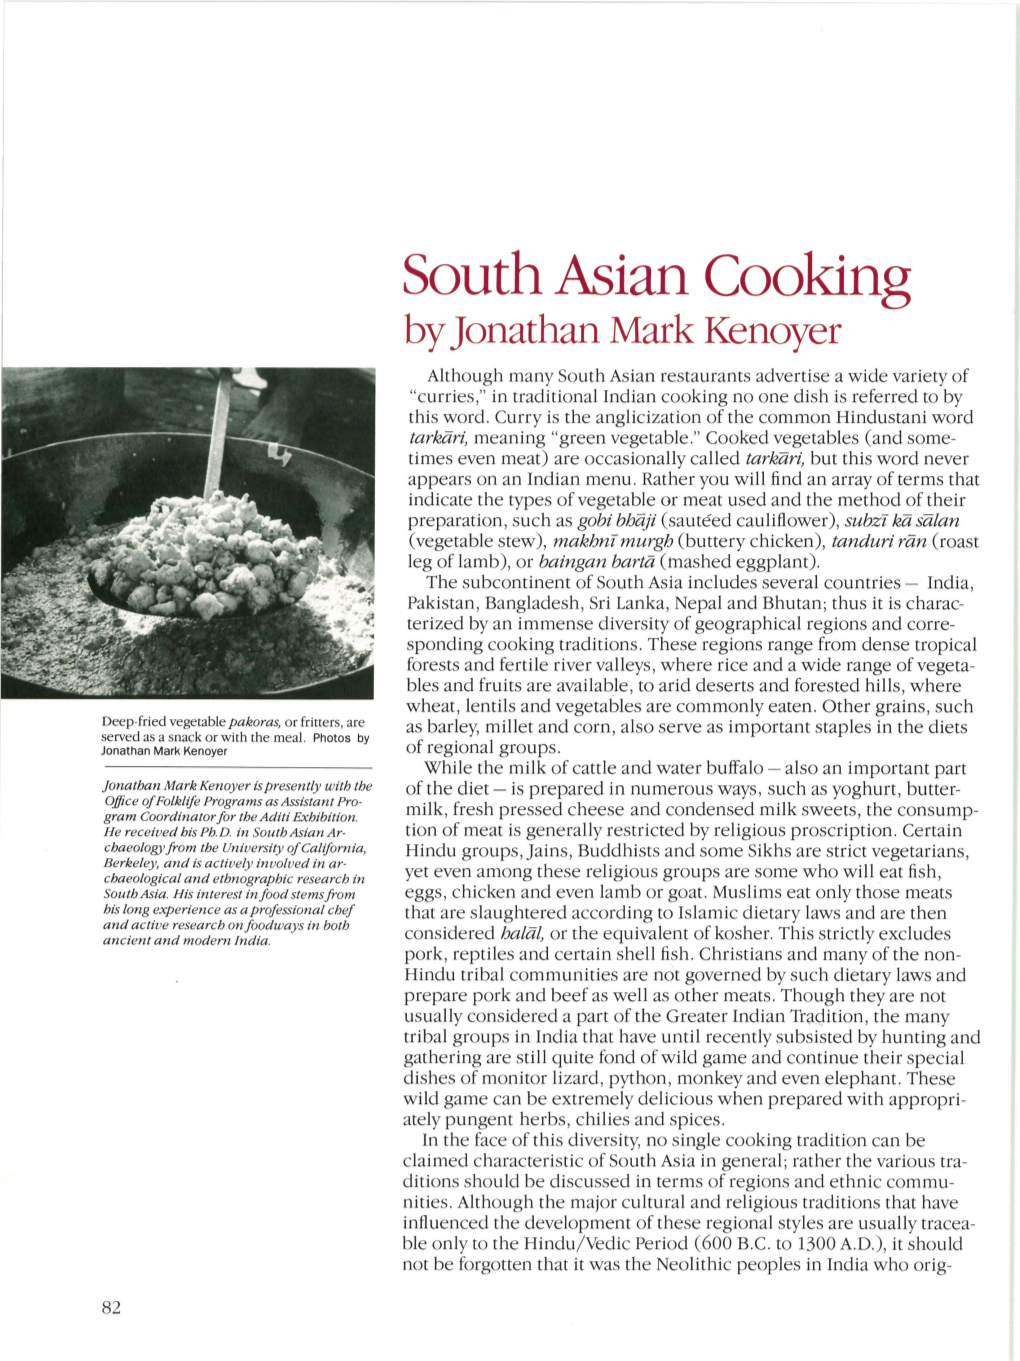 South Asian Cooking